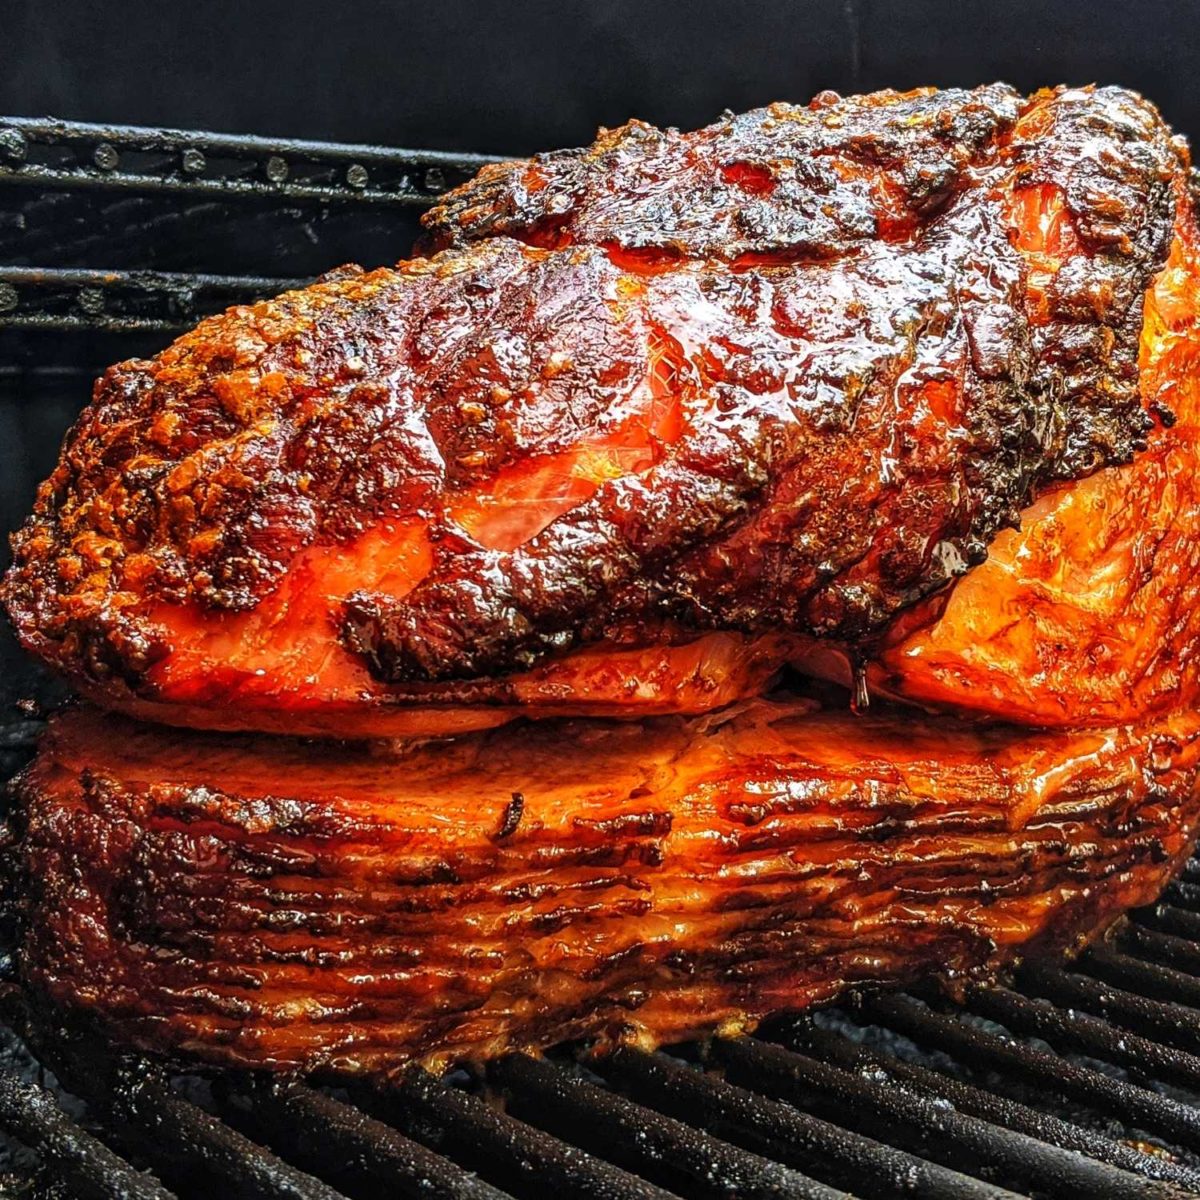 Hickory Smoked Spiral Ham with Glaze on Pellet Grill - Chefs Magnet